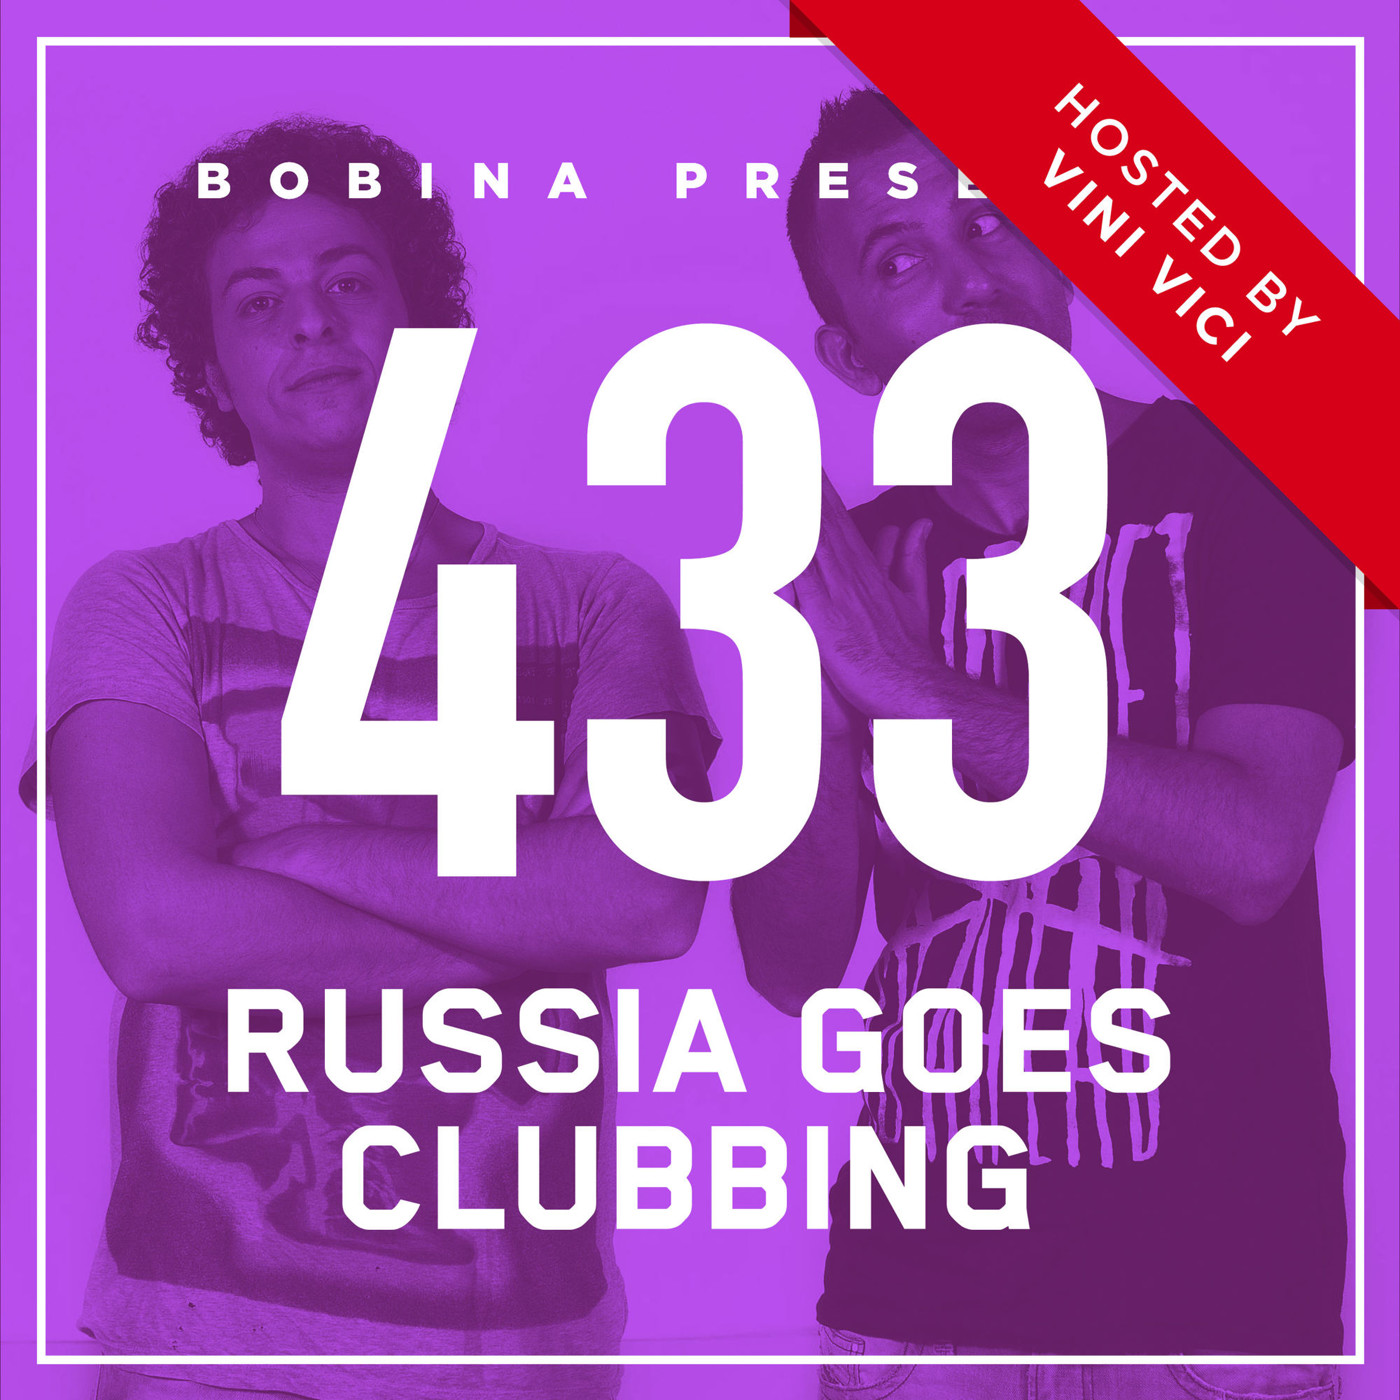 Bobina - Nr. 433 Russia Goes Clubbing [Hosted by Vini Vici]